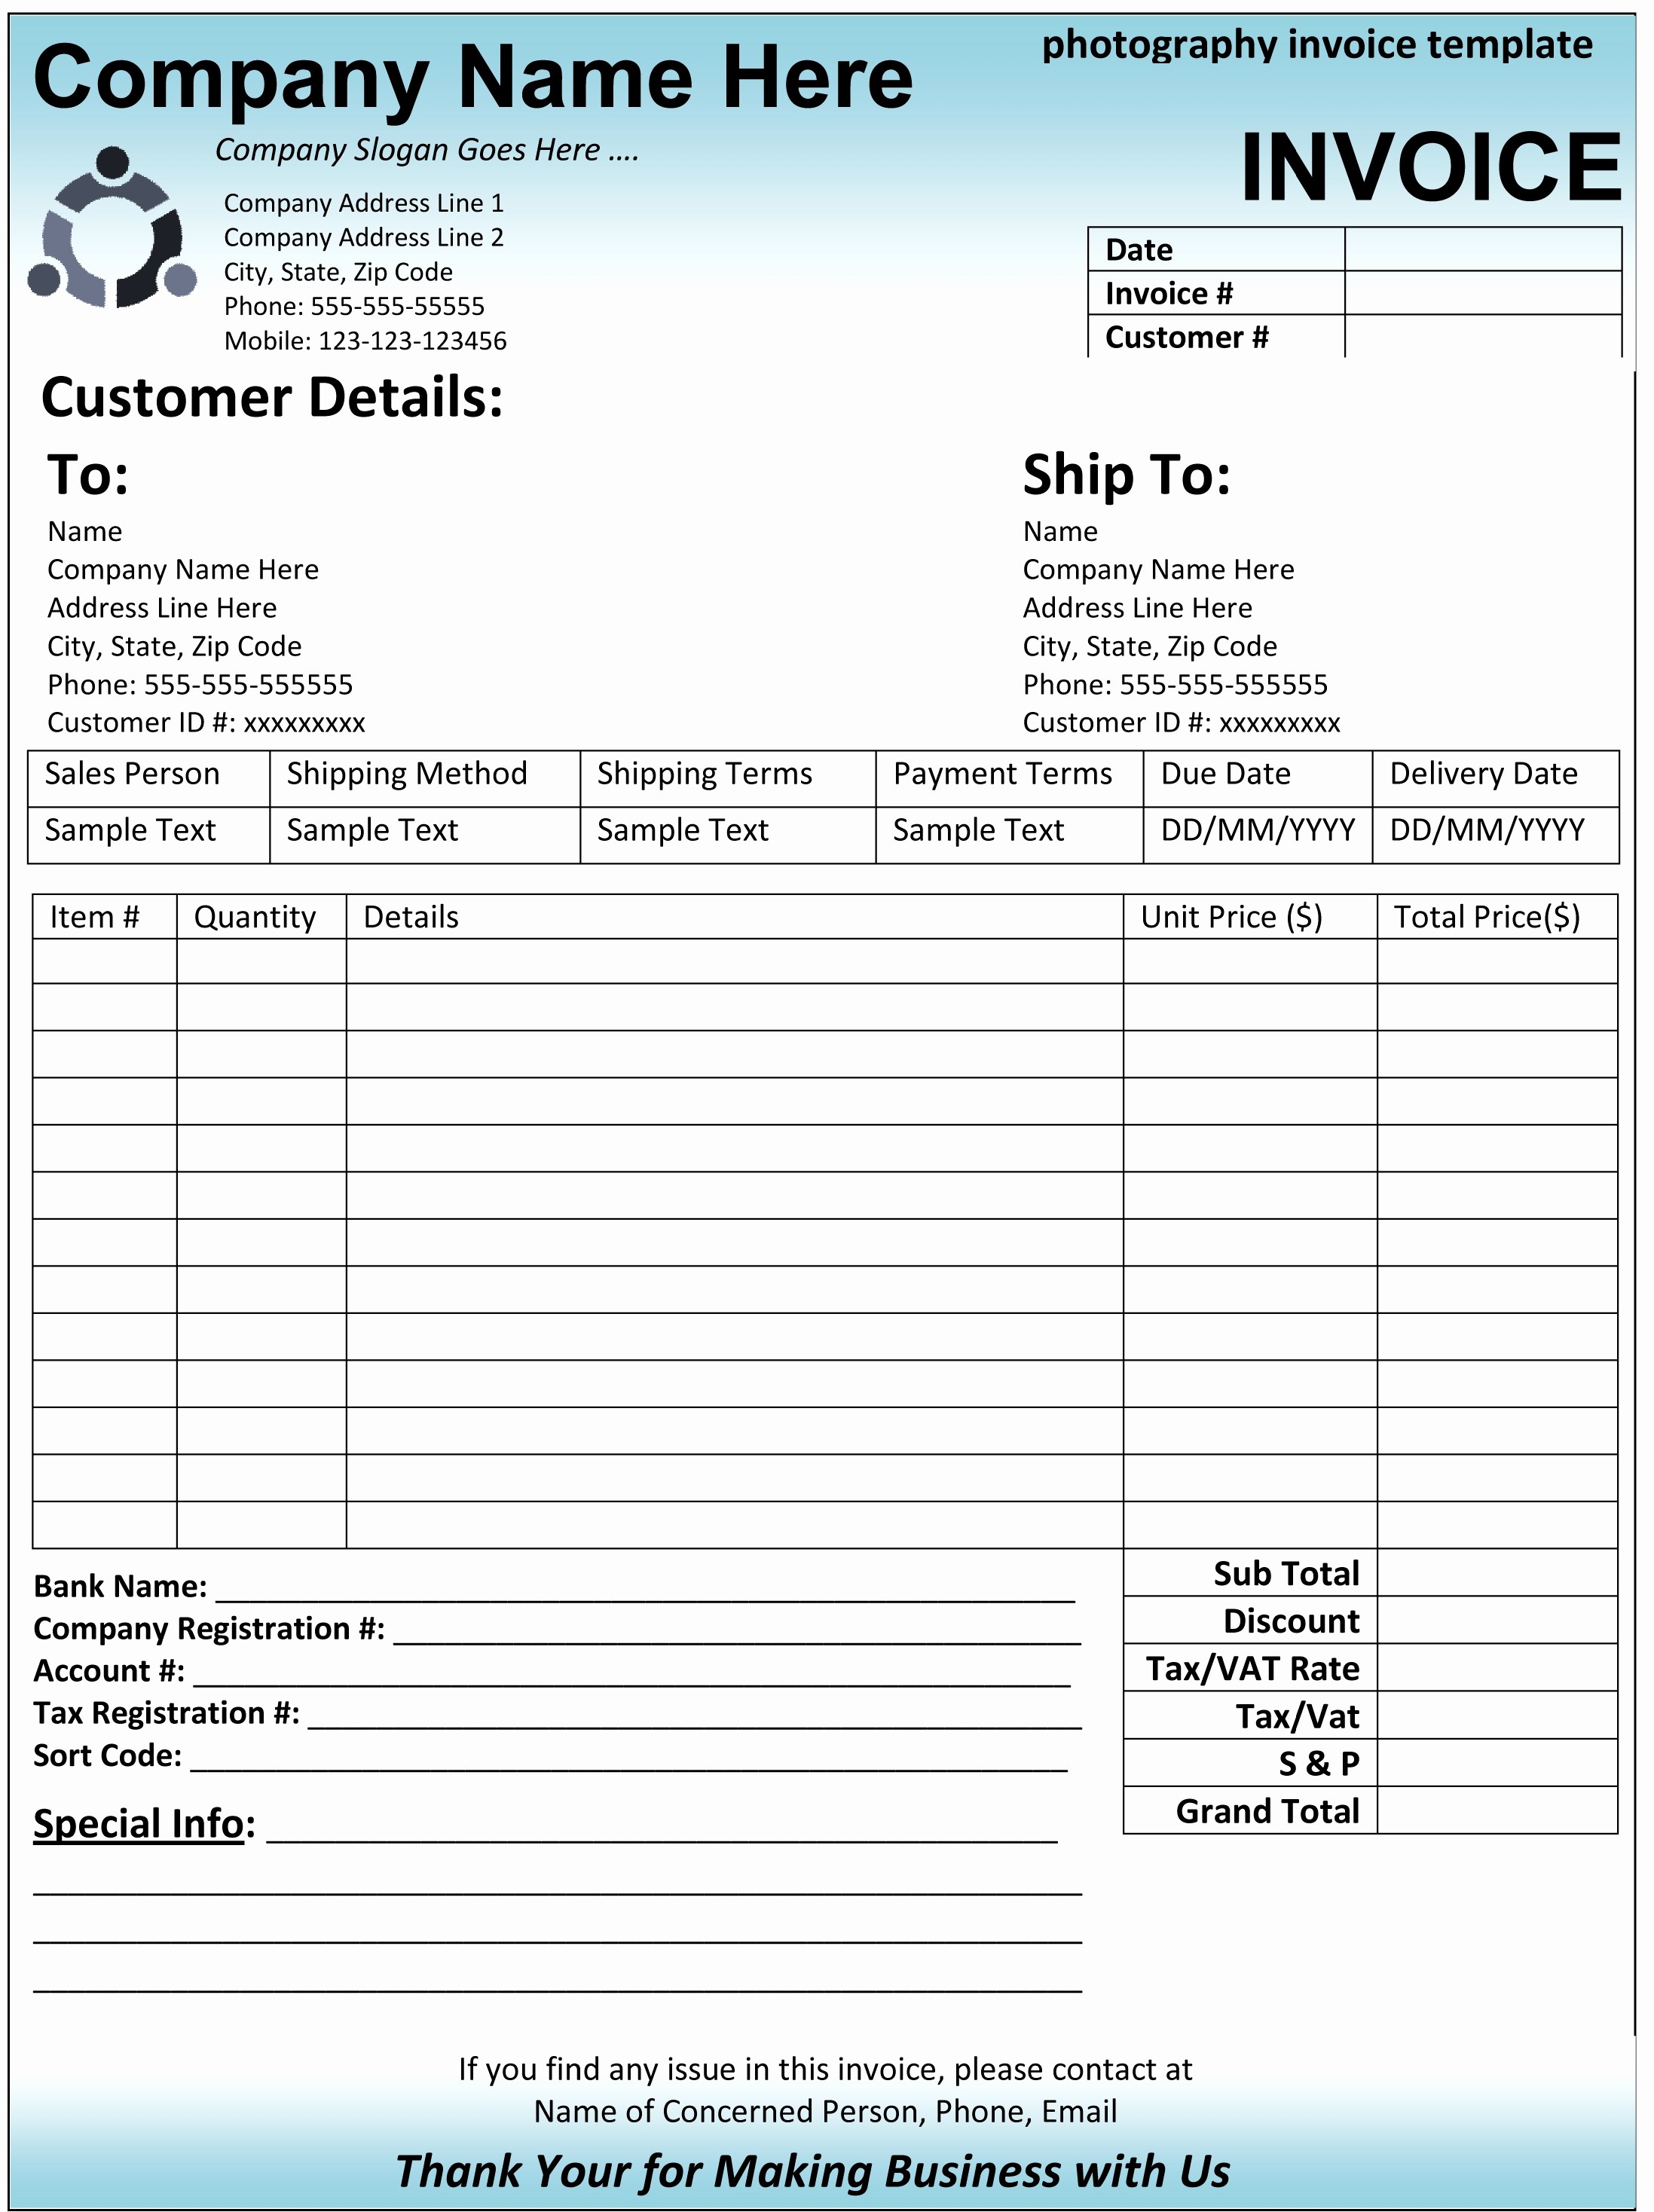 Examples Of Invoices In Word New Graphy Invoice Template Word